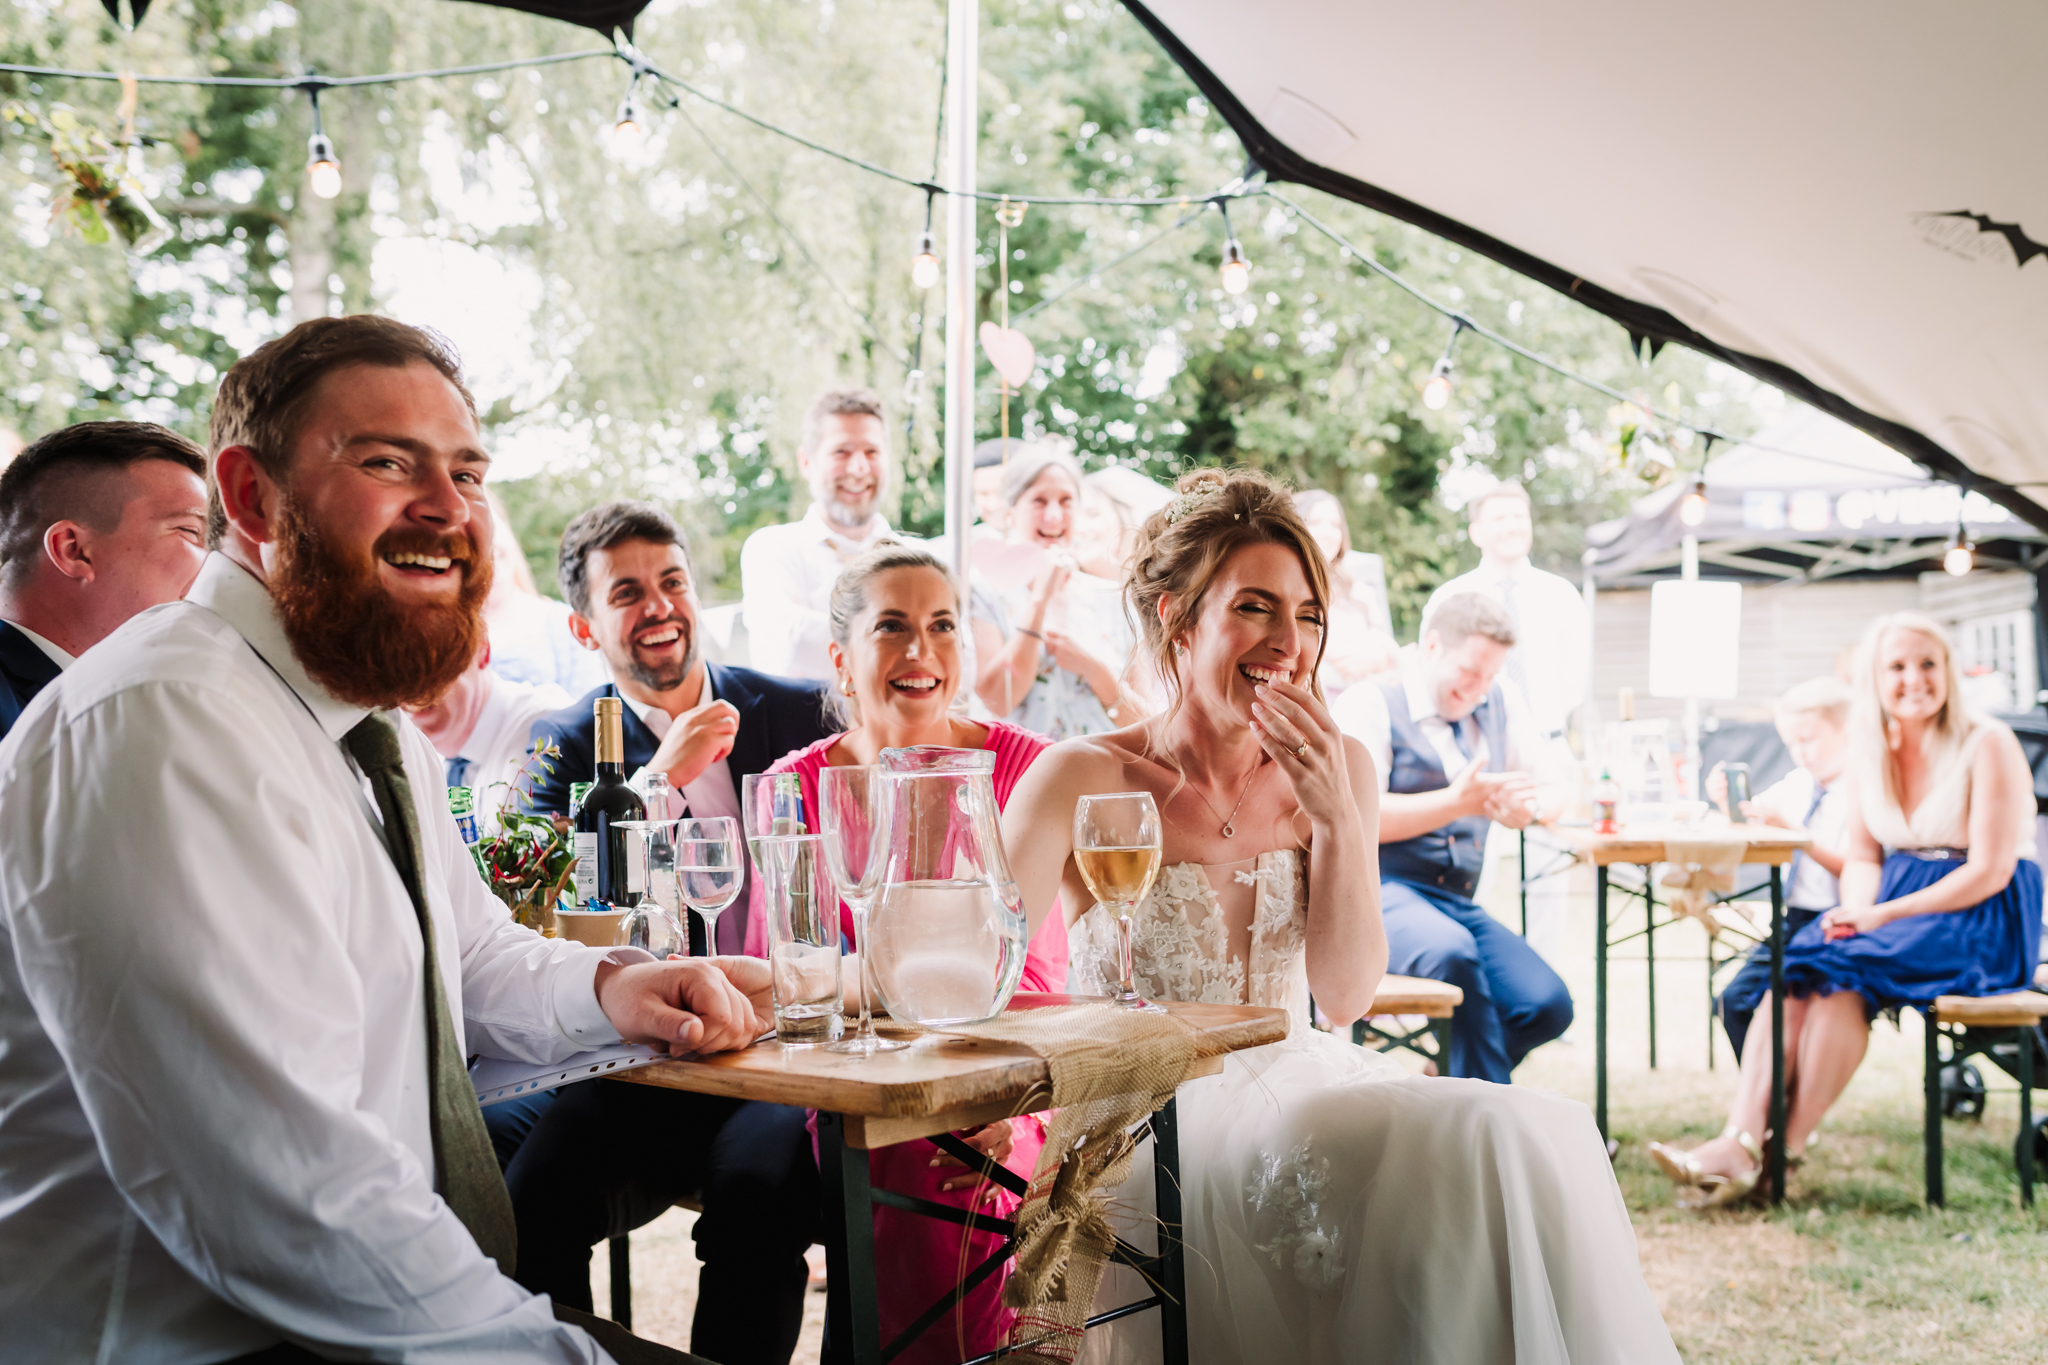 Hertfordshire Garden Party wedding Photographer captures guests laughing at the speeches